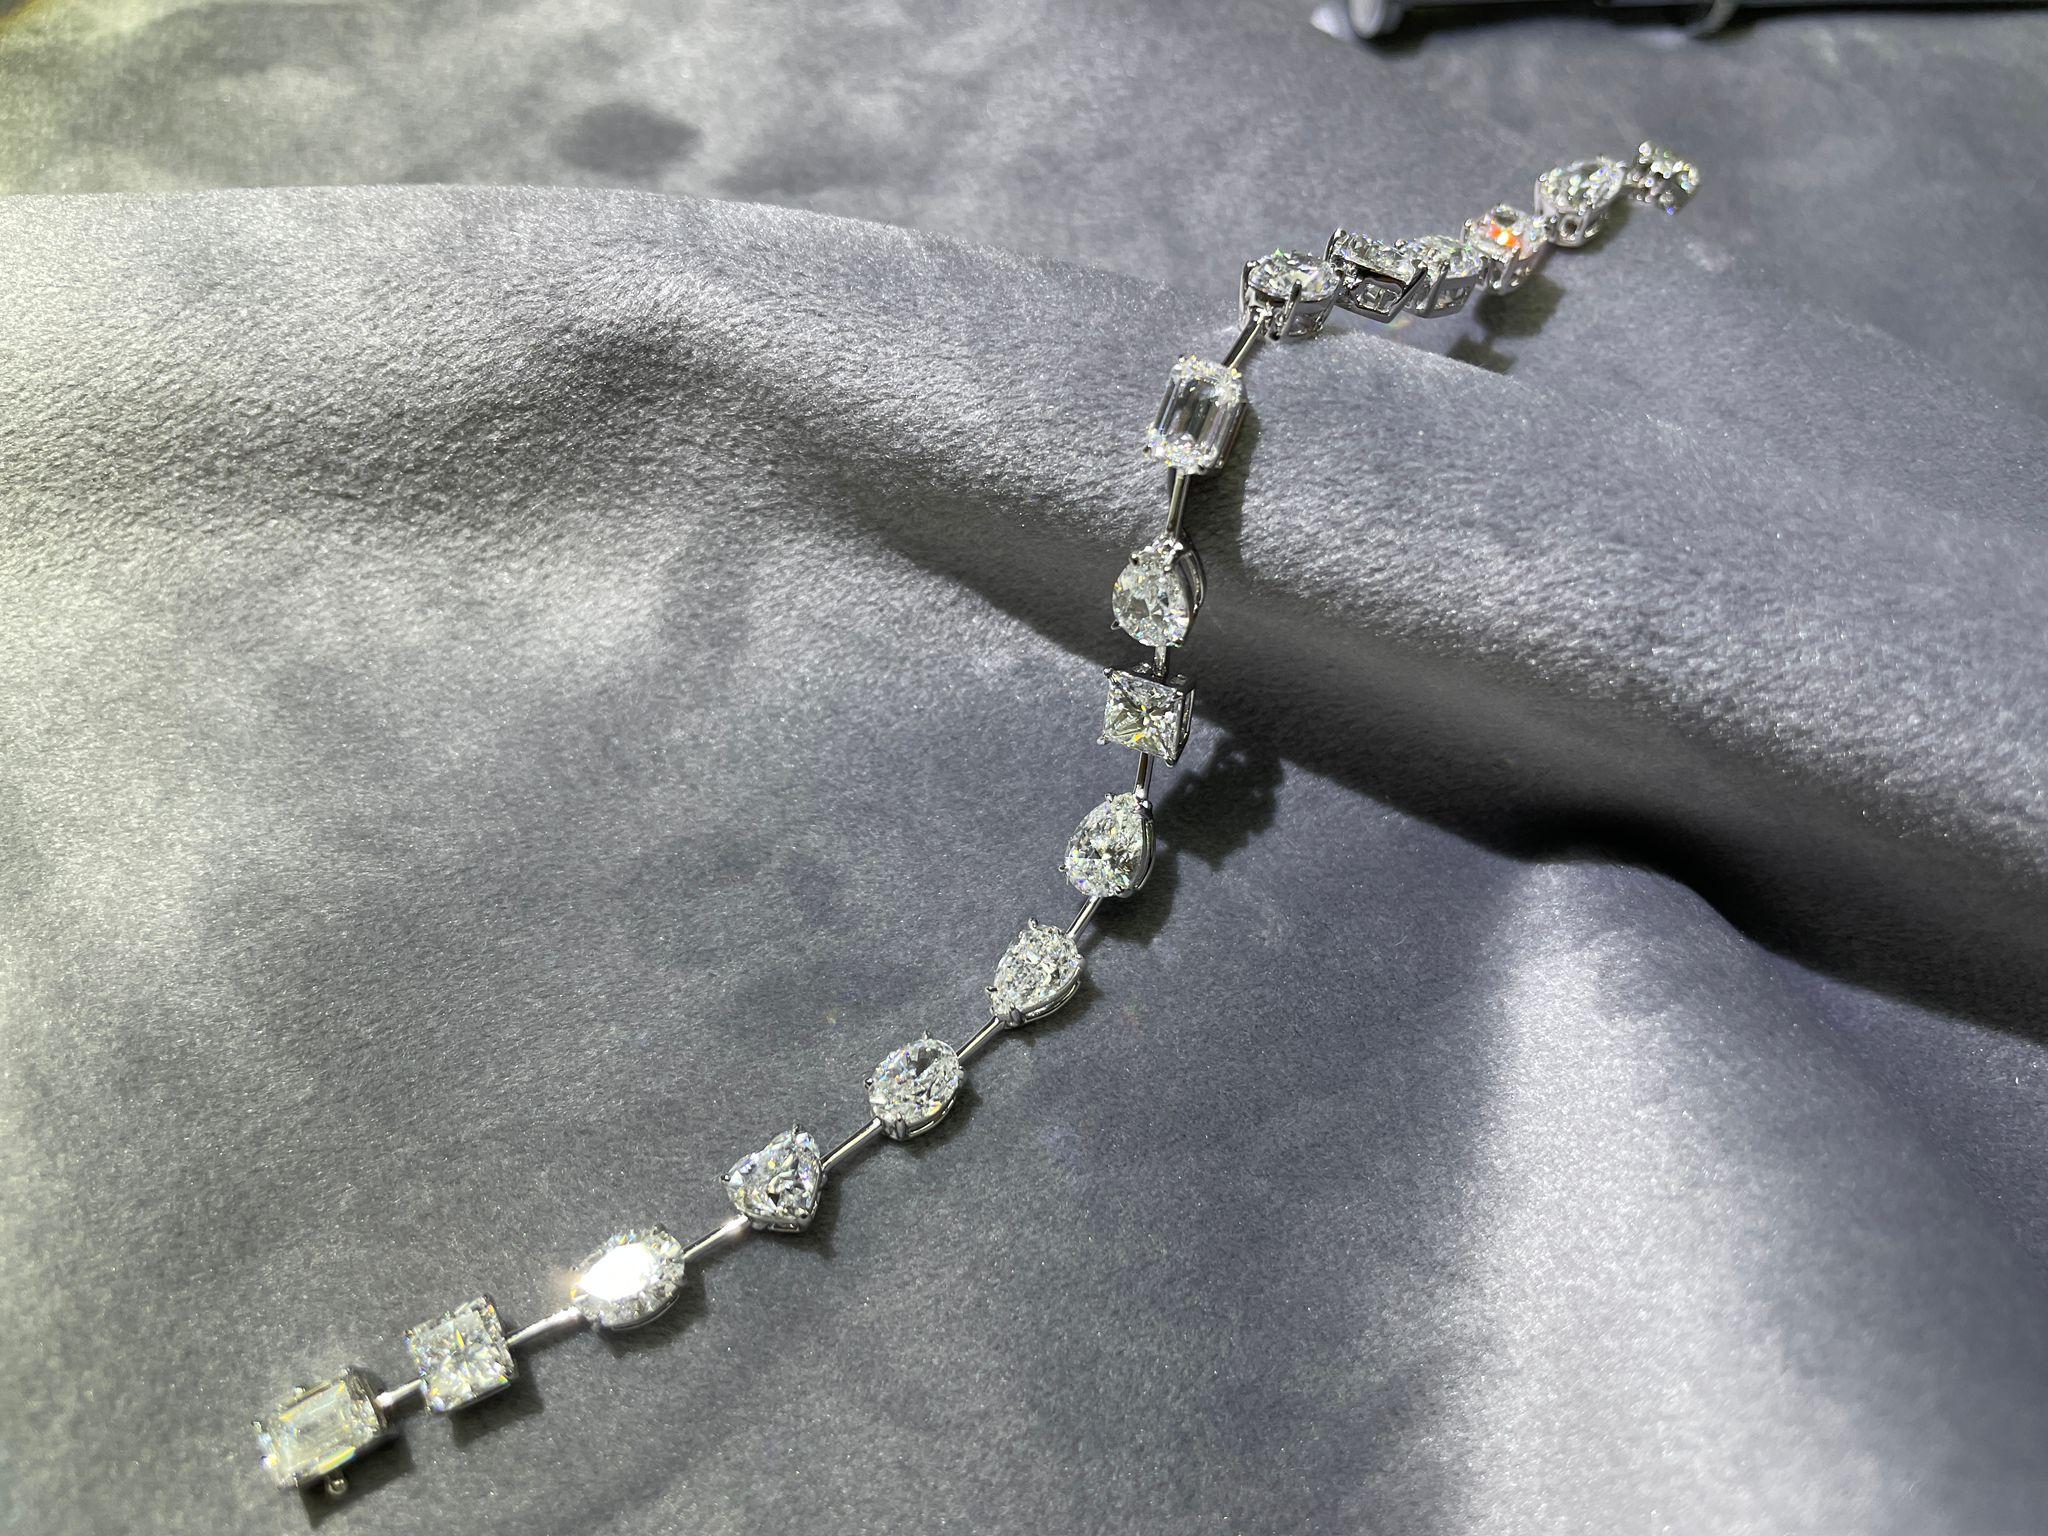 0.7 carat each, mixed shape White Diamond bracelet, with all D/E/F color, VS/SI quality, GIA certified stones. The bracelet consists of 16 pieces, all set in solid 18K White Gold
Please feel free to message us for more information. 
We provide free